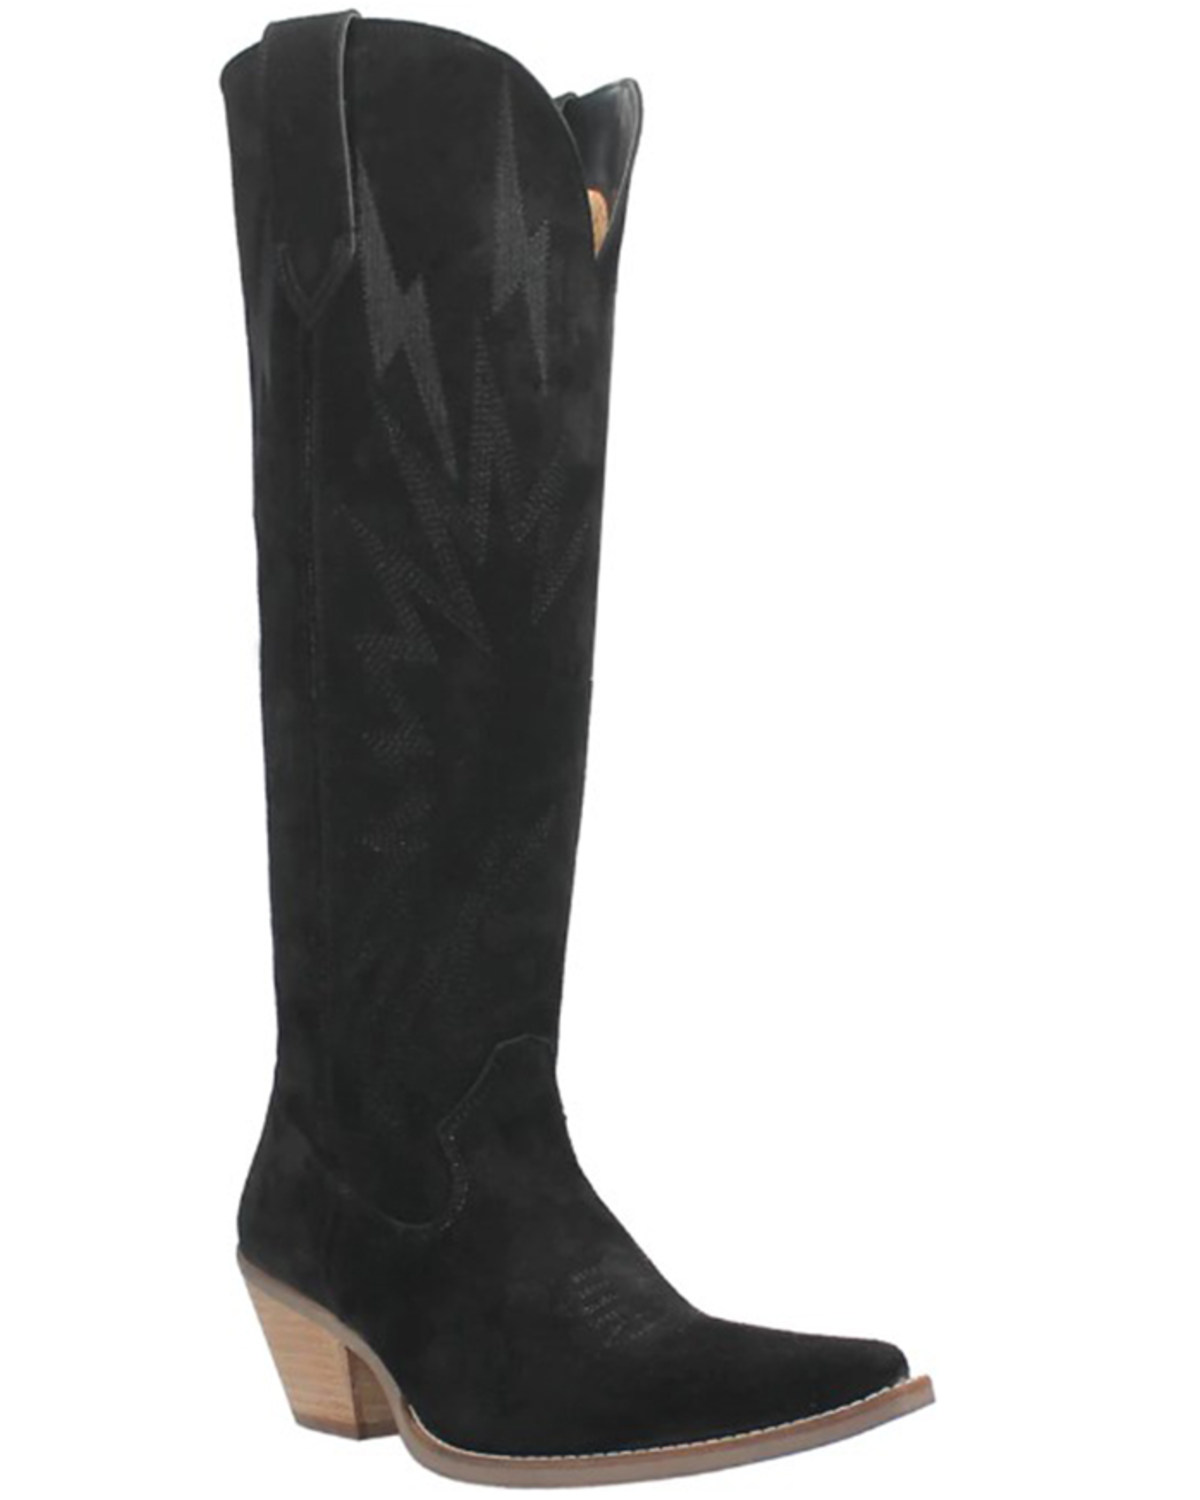 Dingo Women's Thunder Road Western Performance Boots